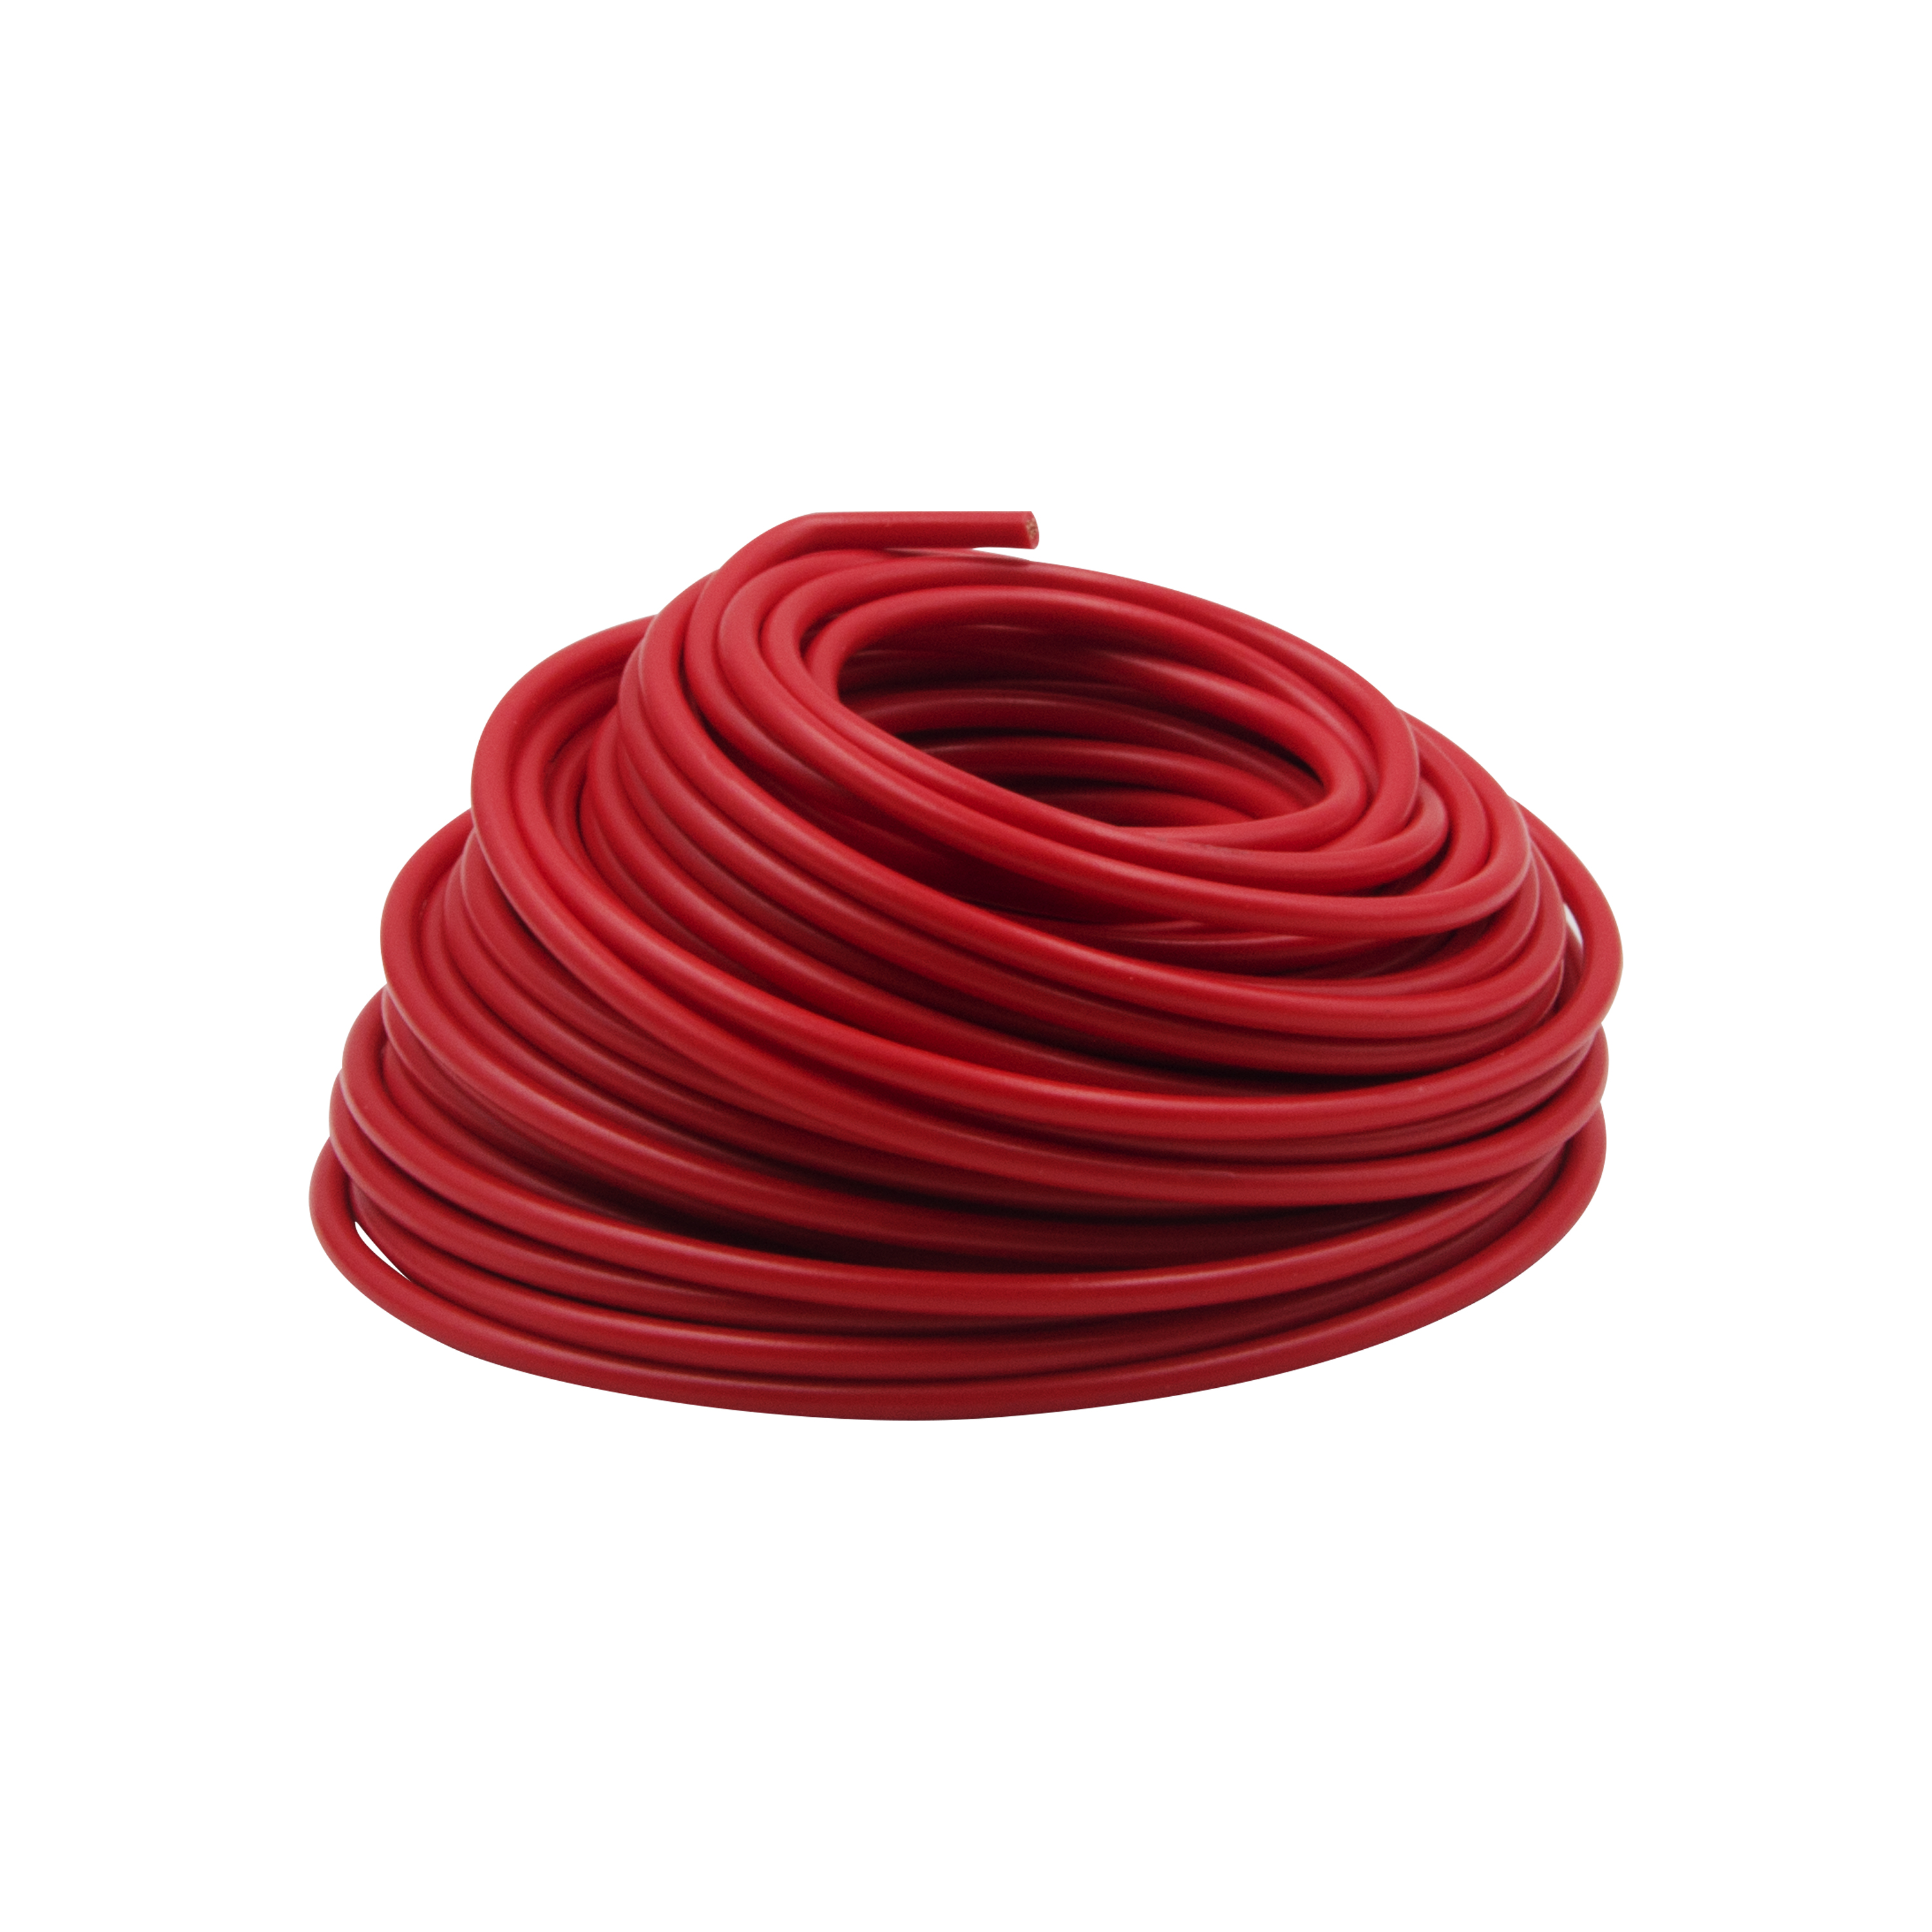 EverStart Universal 12-Gauge Auto Wire, Red, 12 feet, Light Swith to Fuse Block or Relay for Car - image 3 of 8